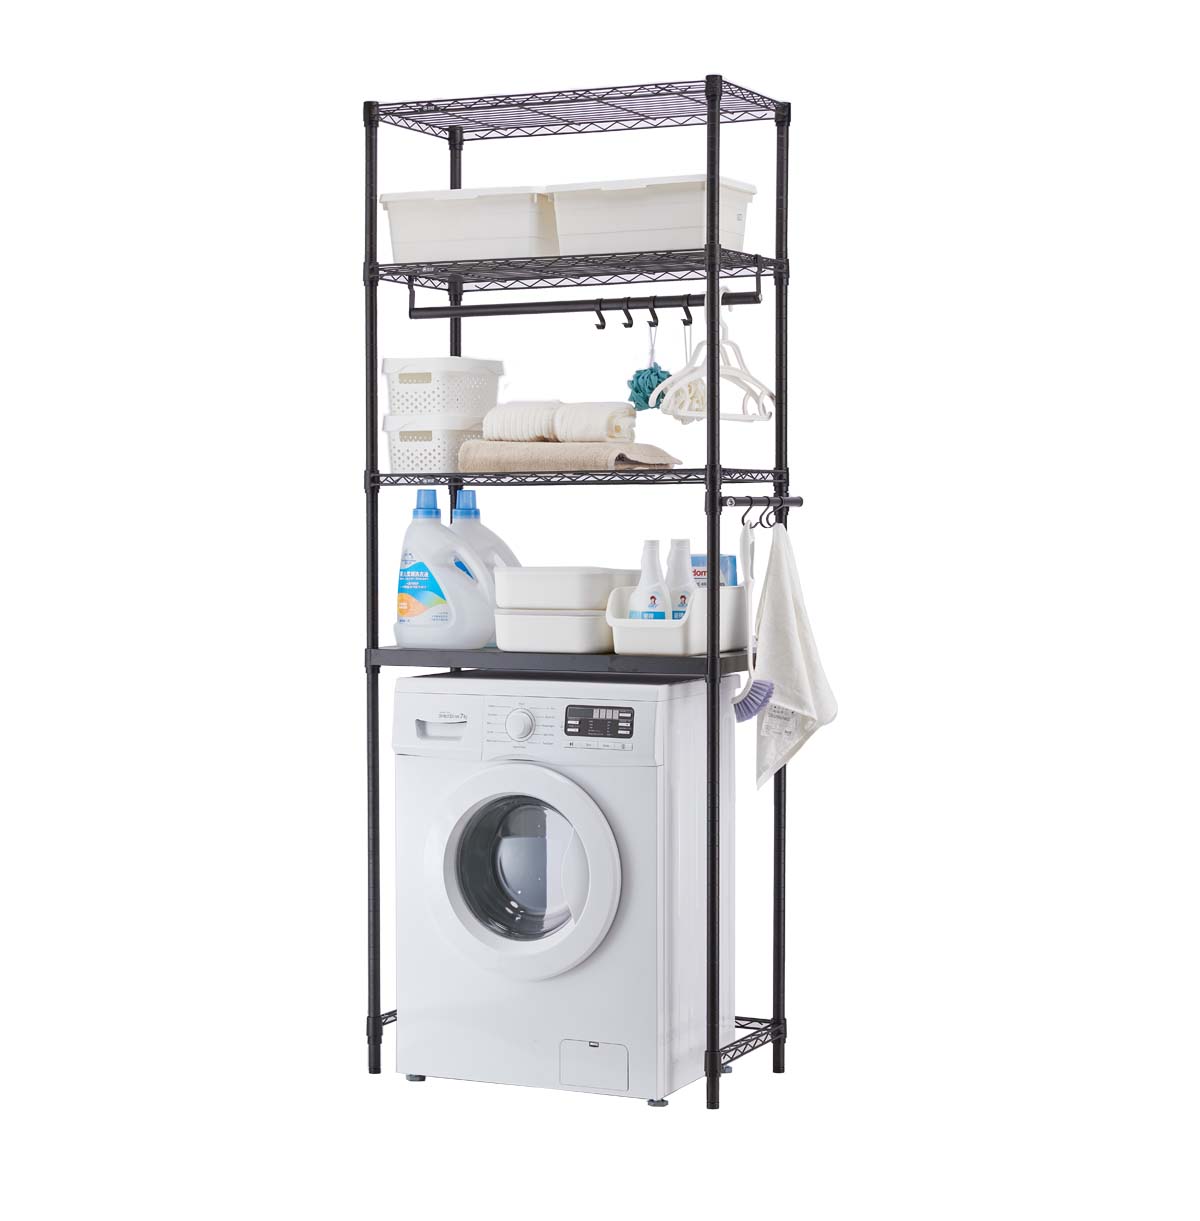 4-Tier Washing Machine Storage Rack with Hanging Rods and Hooks